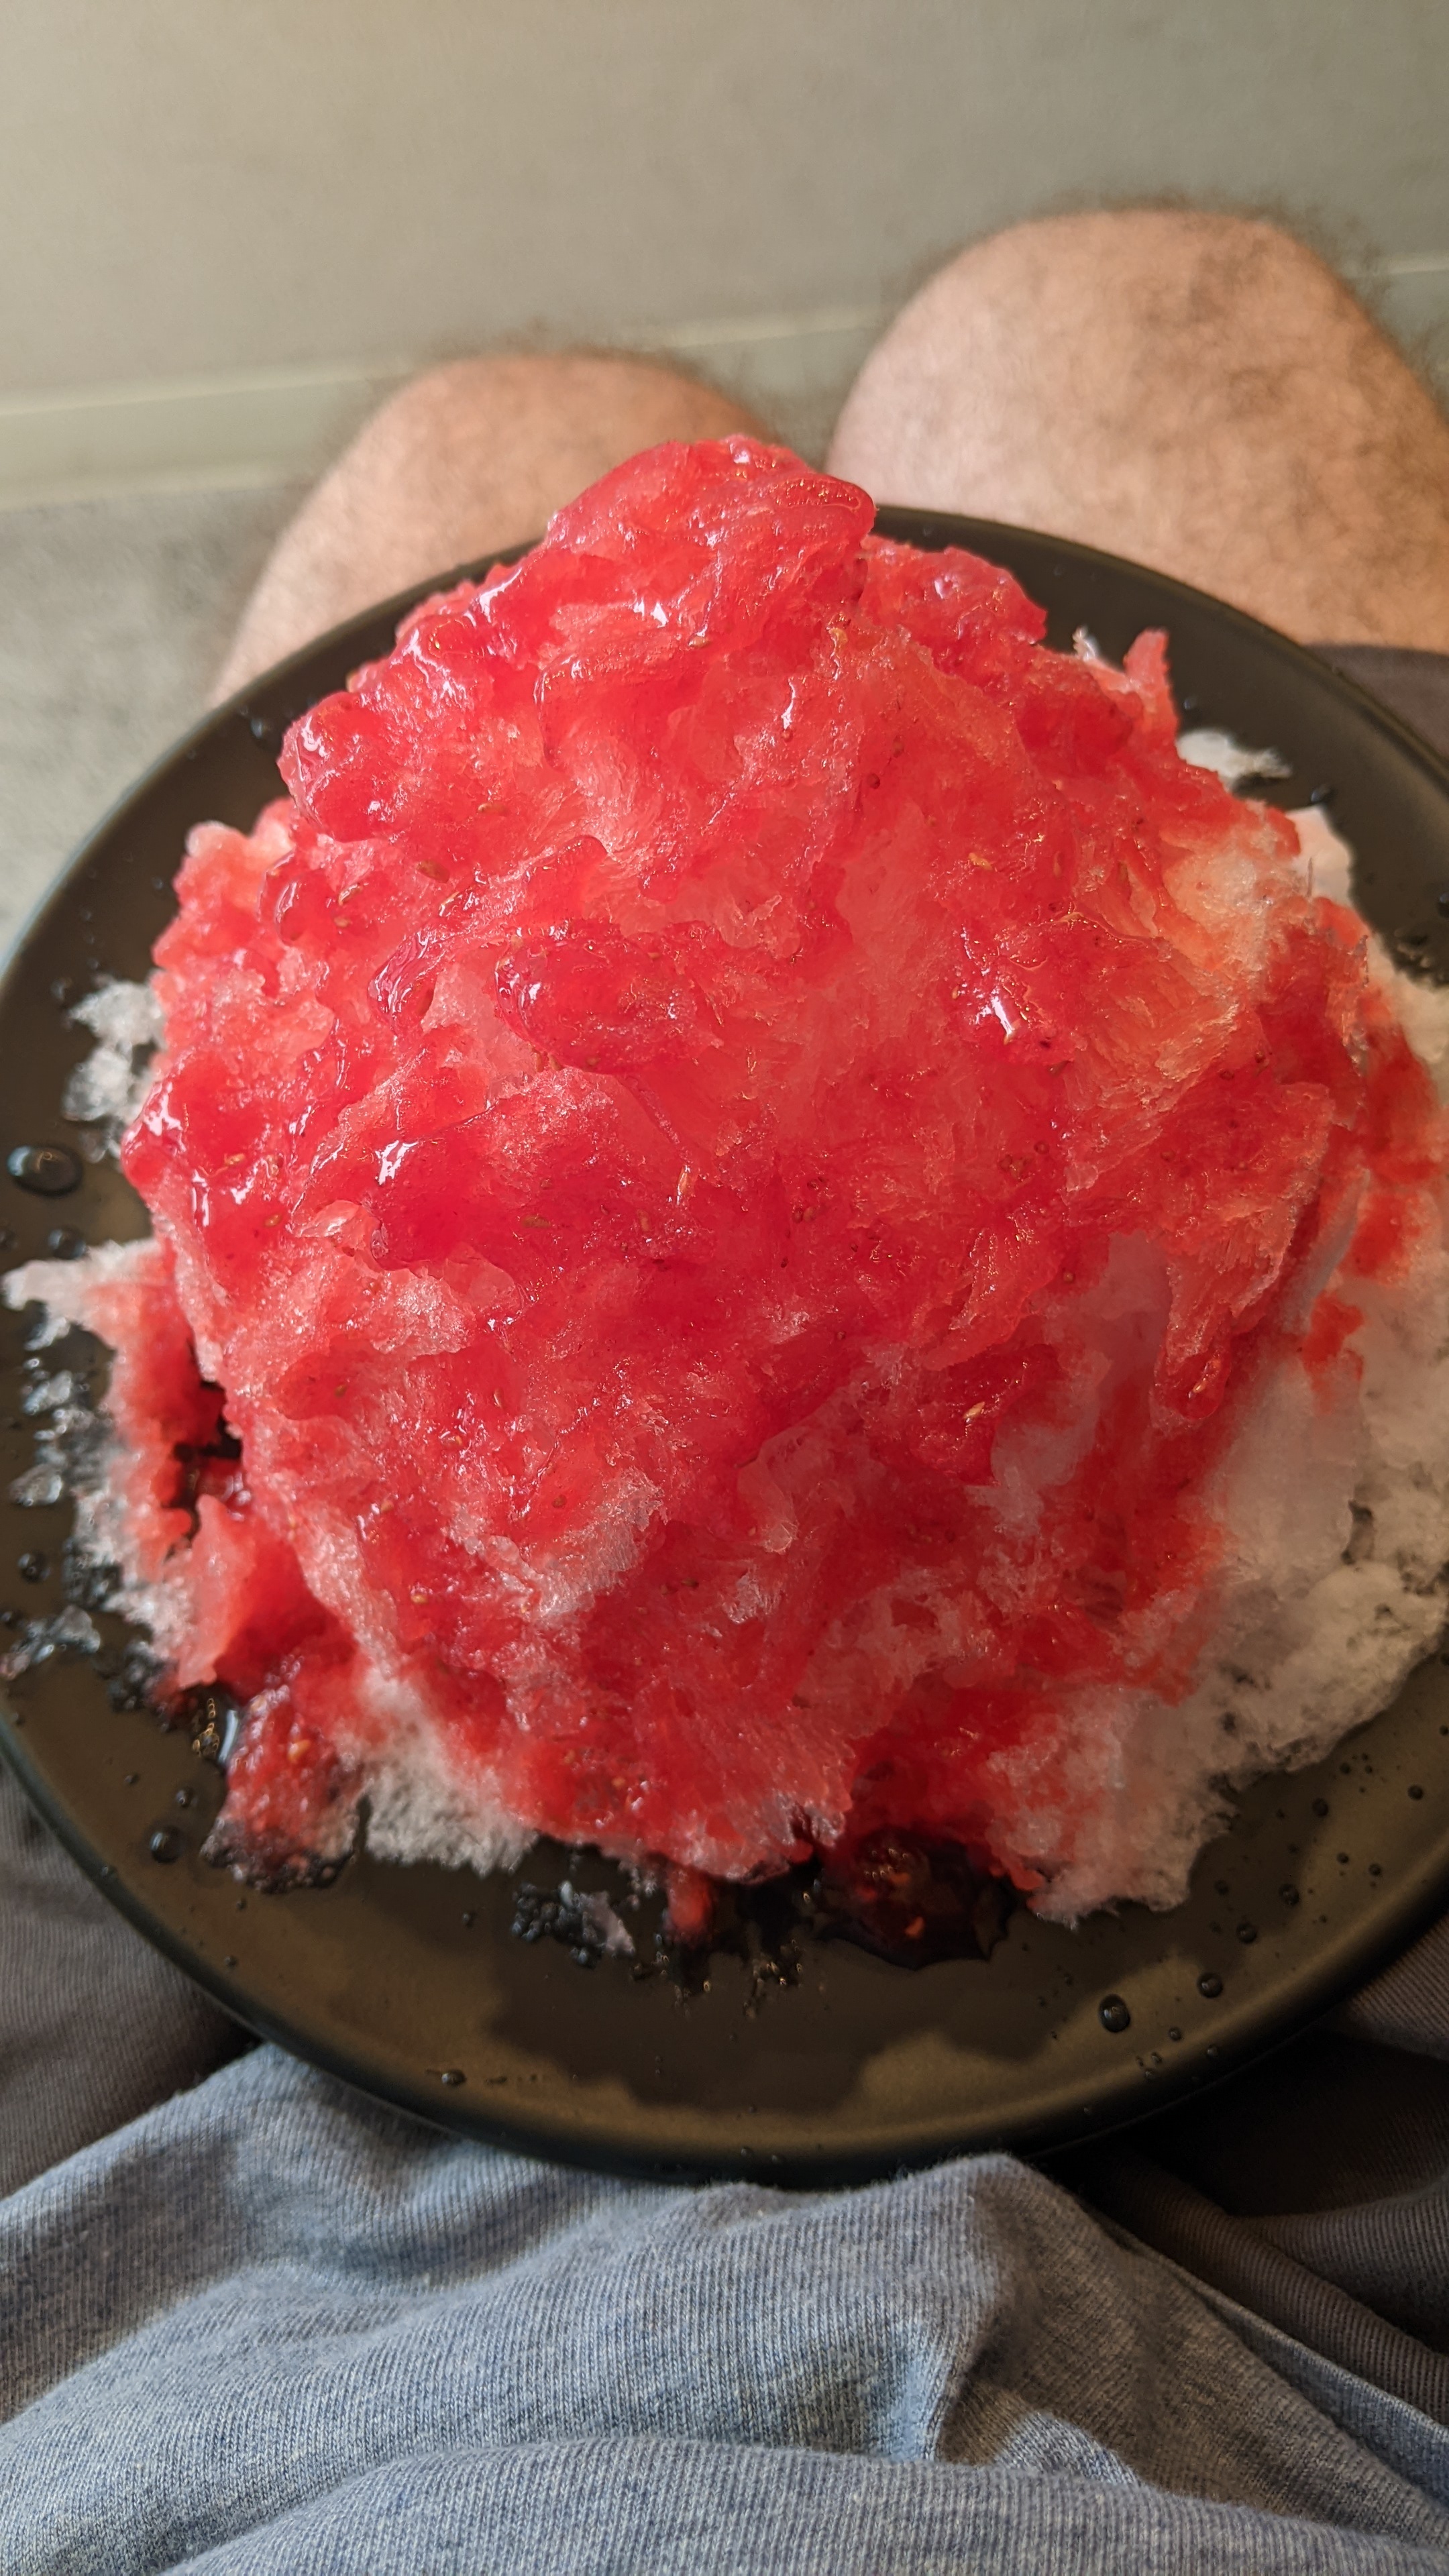 Looking down at my strawberry red shaved ice